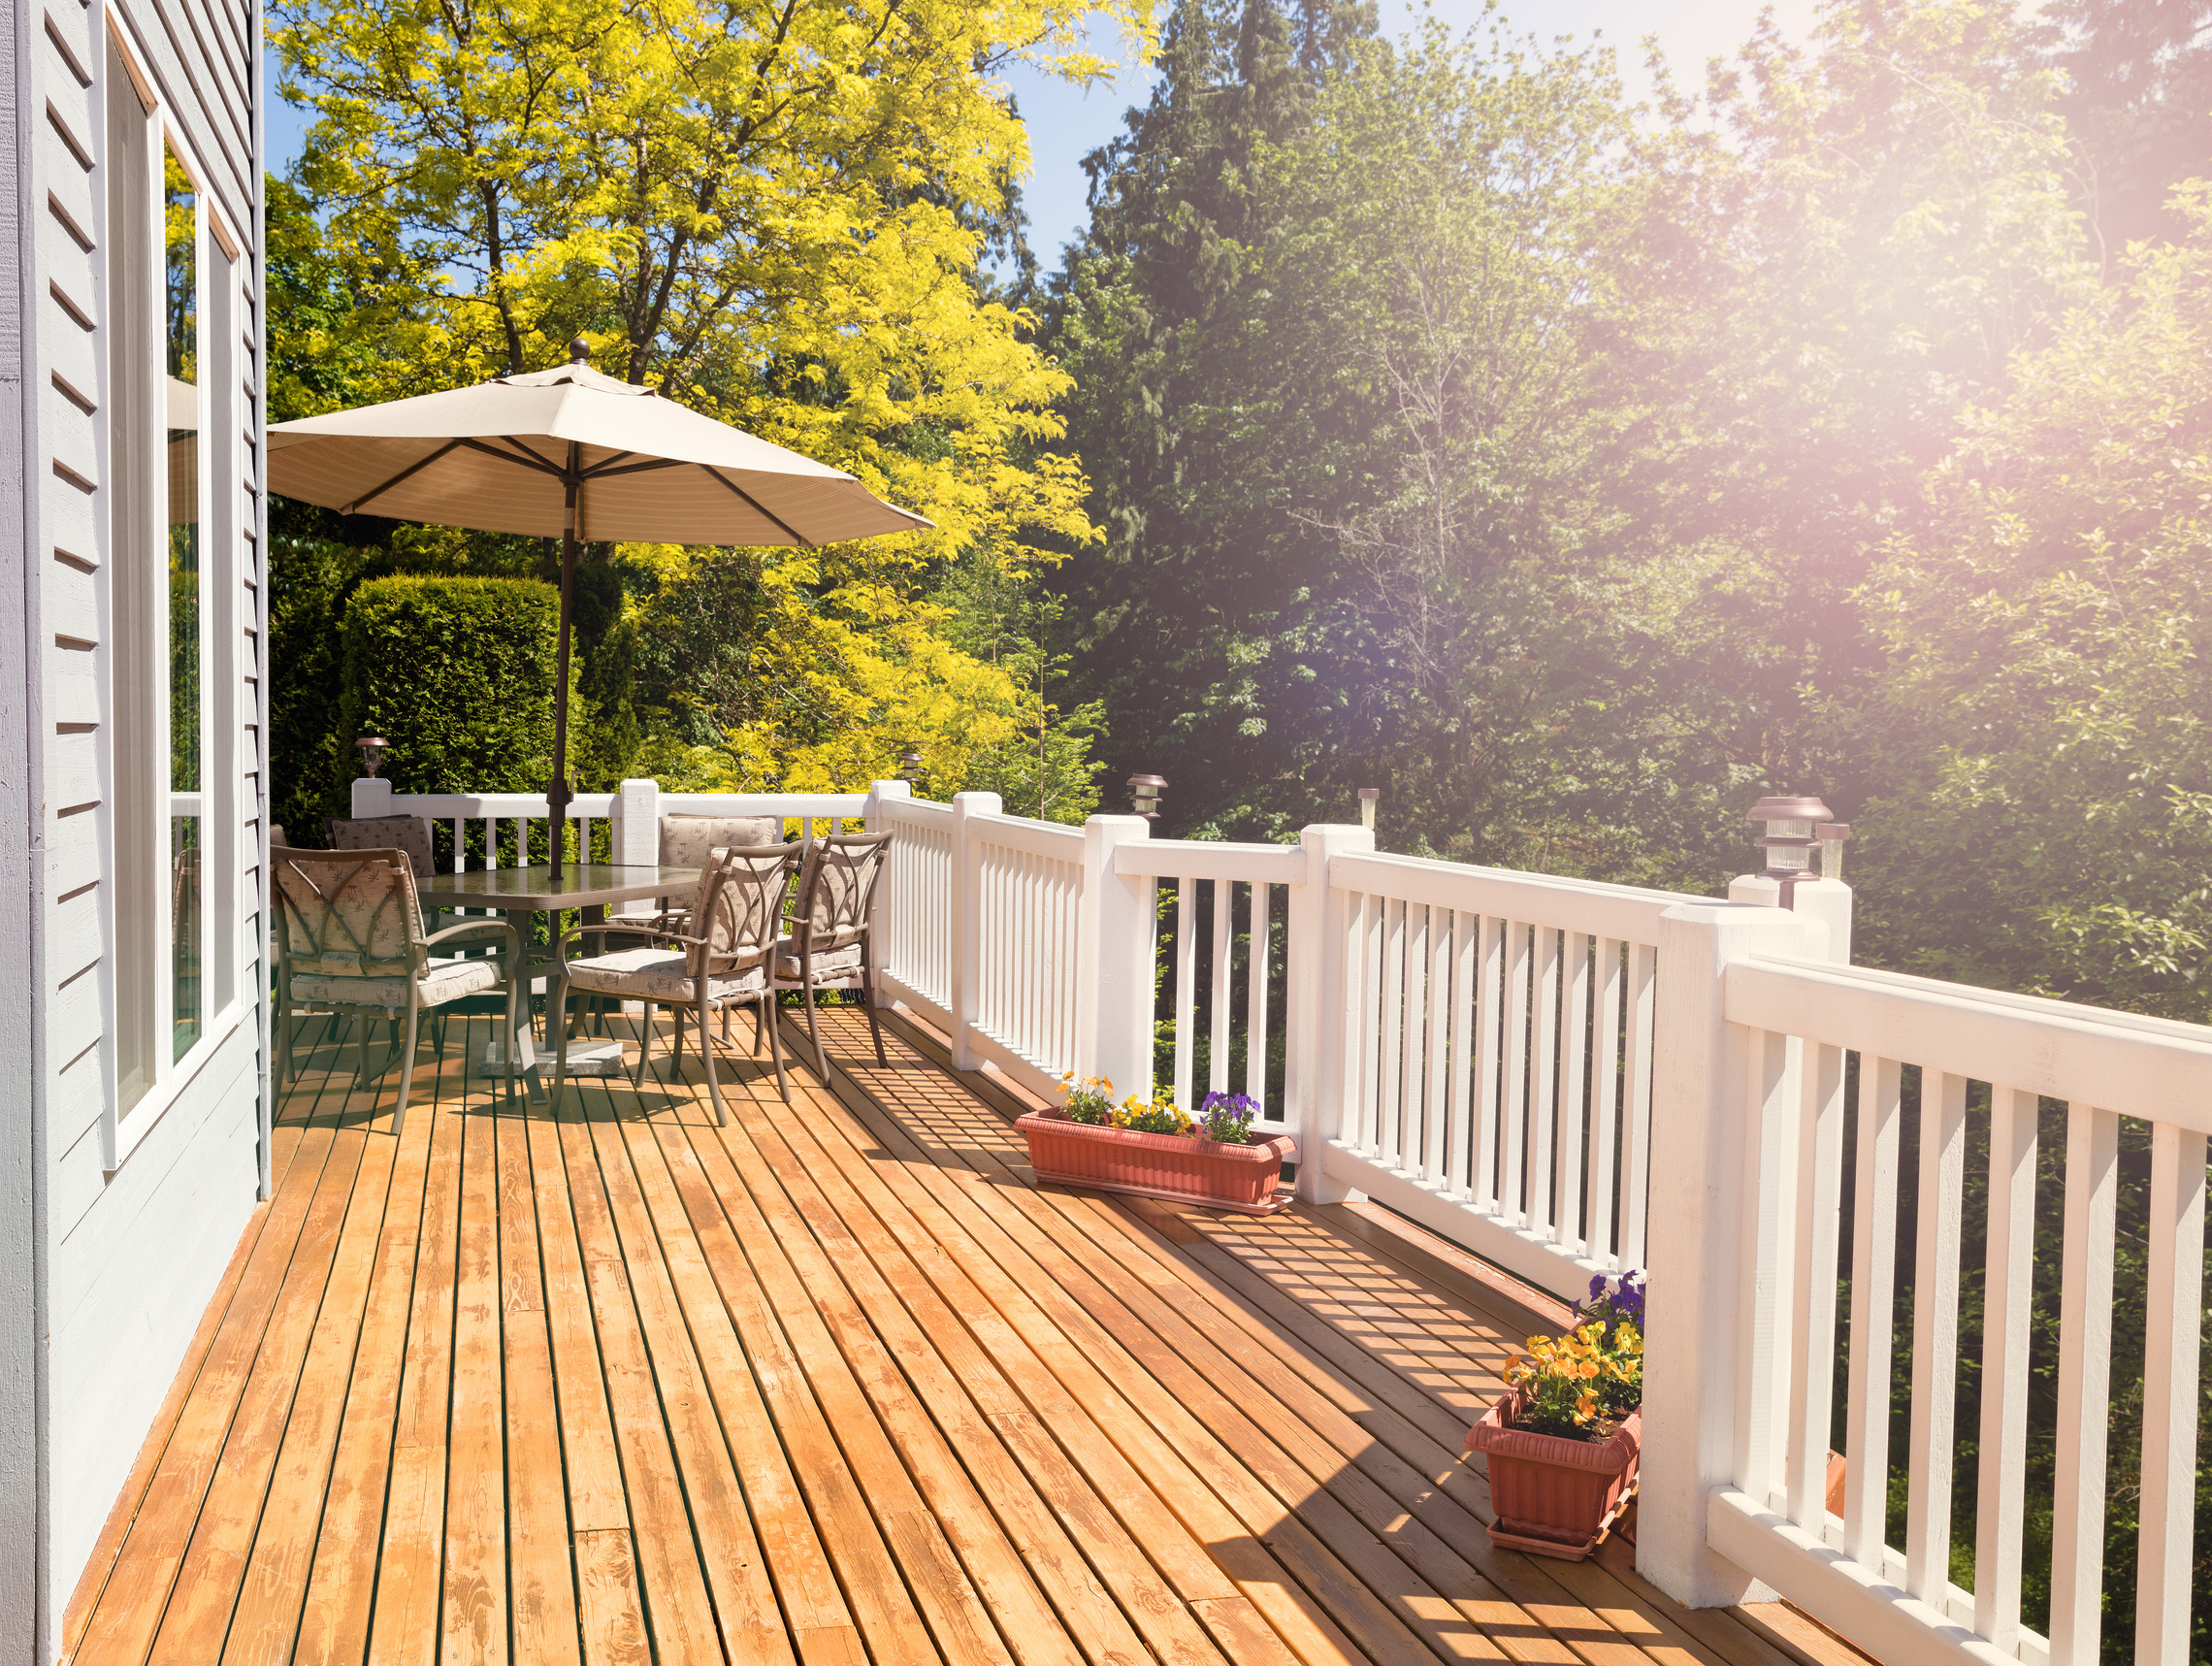 Bright daylight falling on home outdoor deck